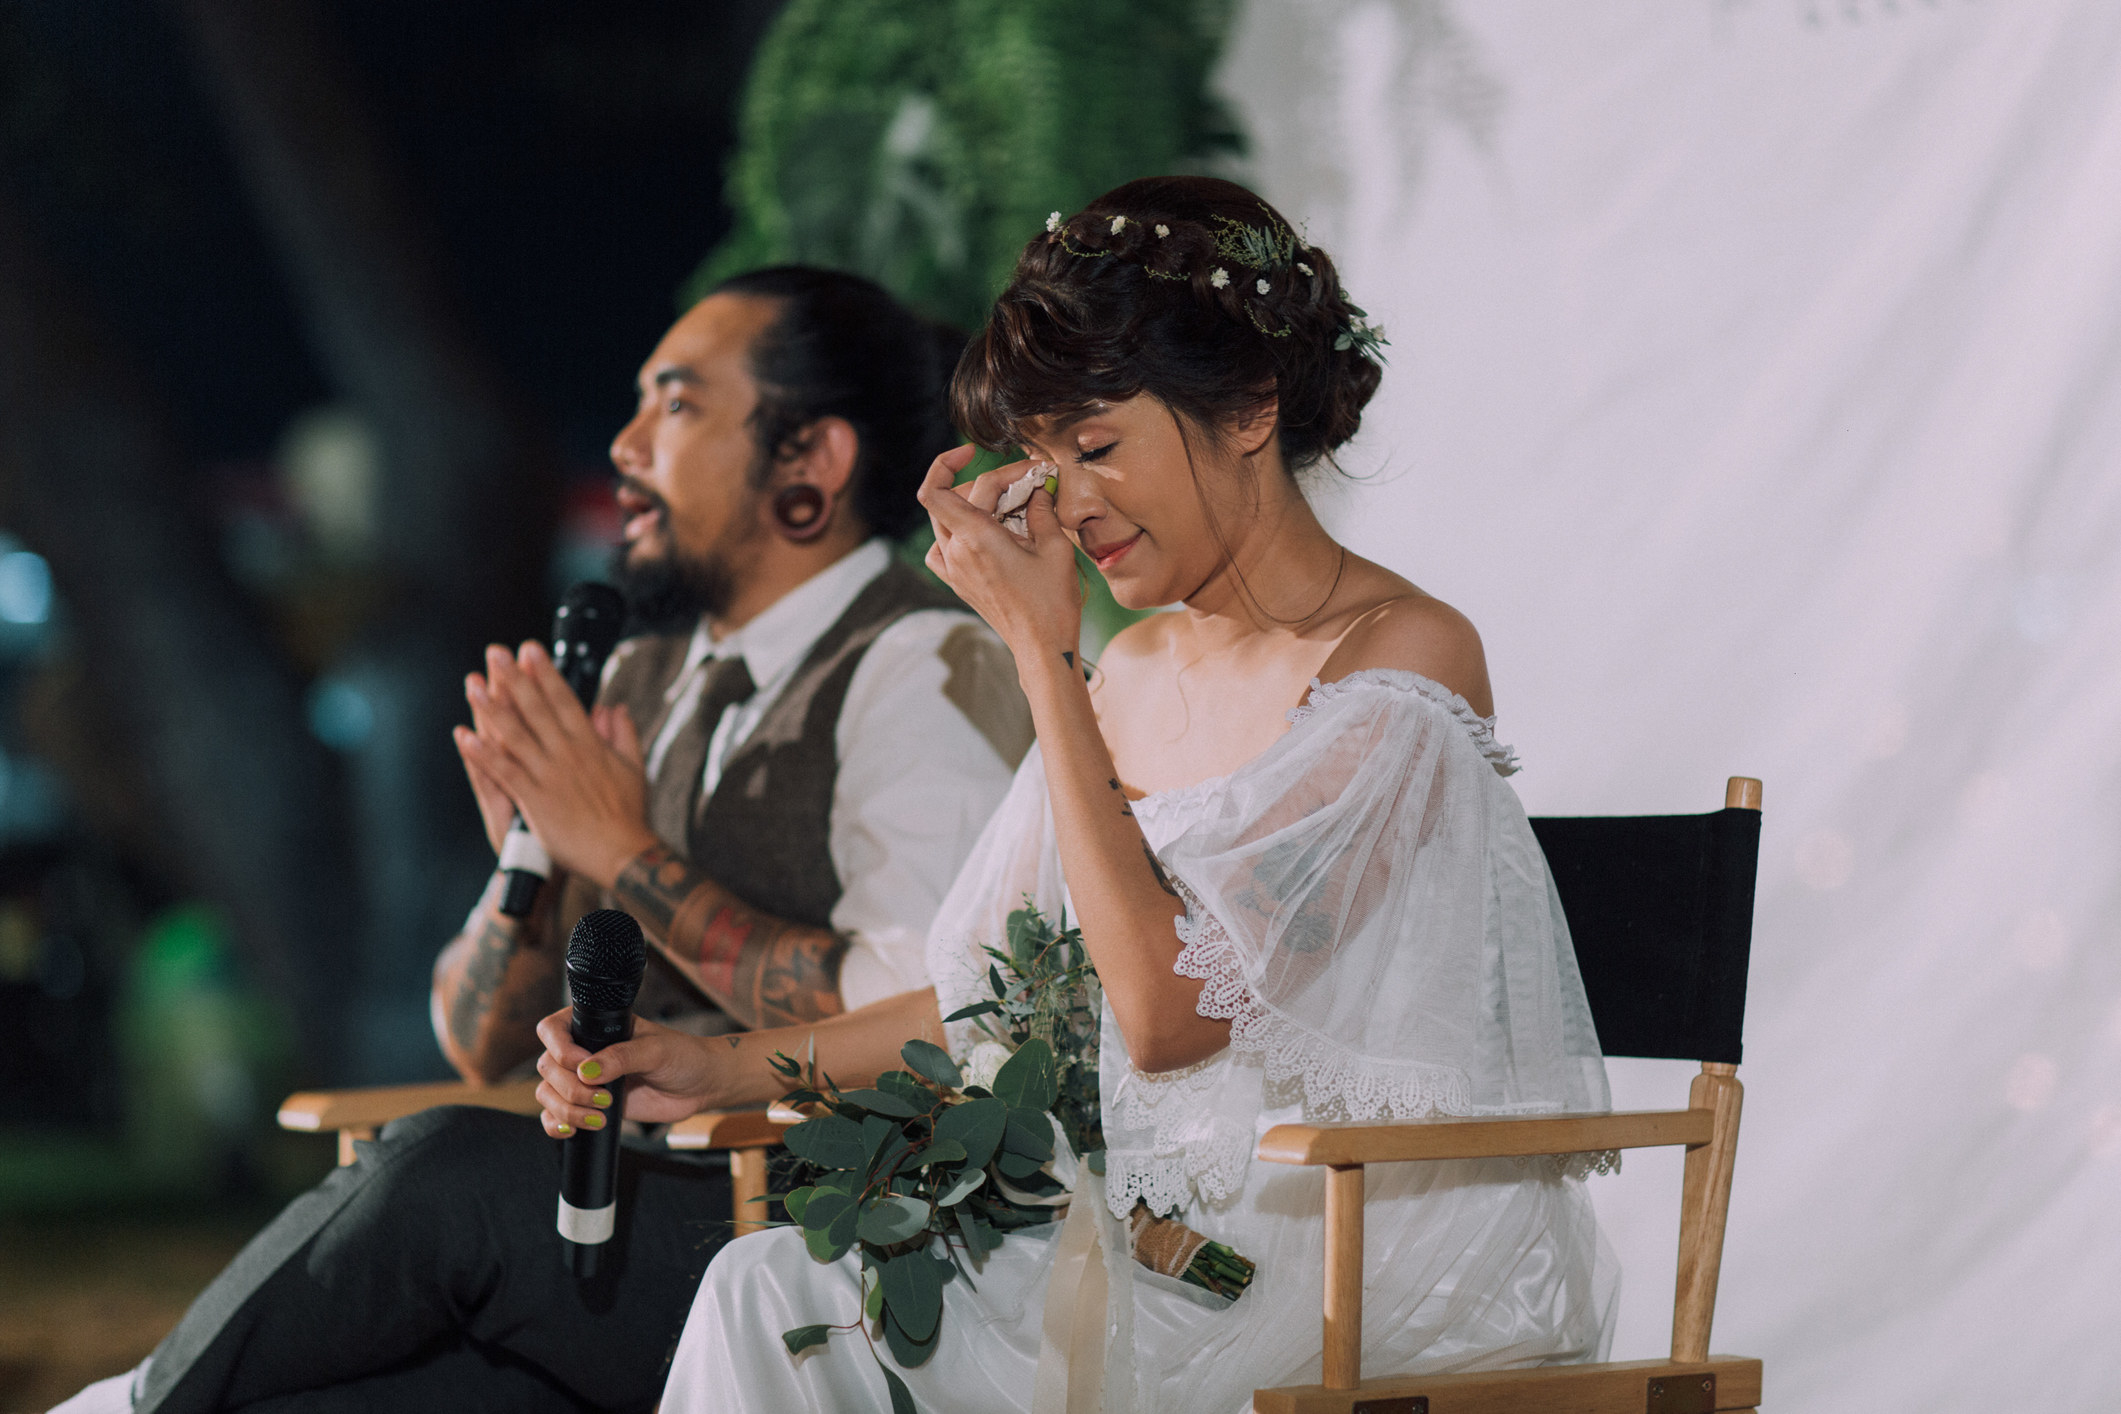 A bride wiping away tears as they sit next their groom